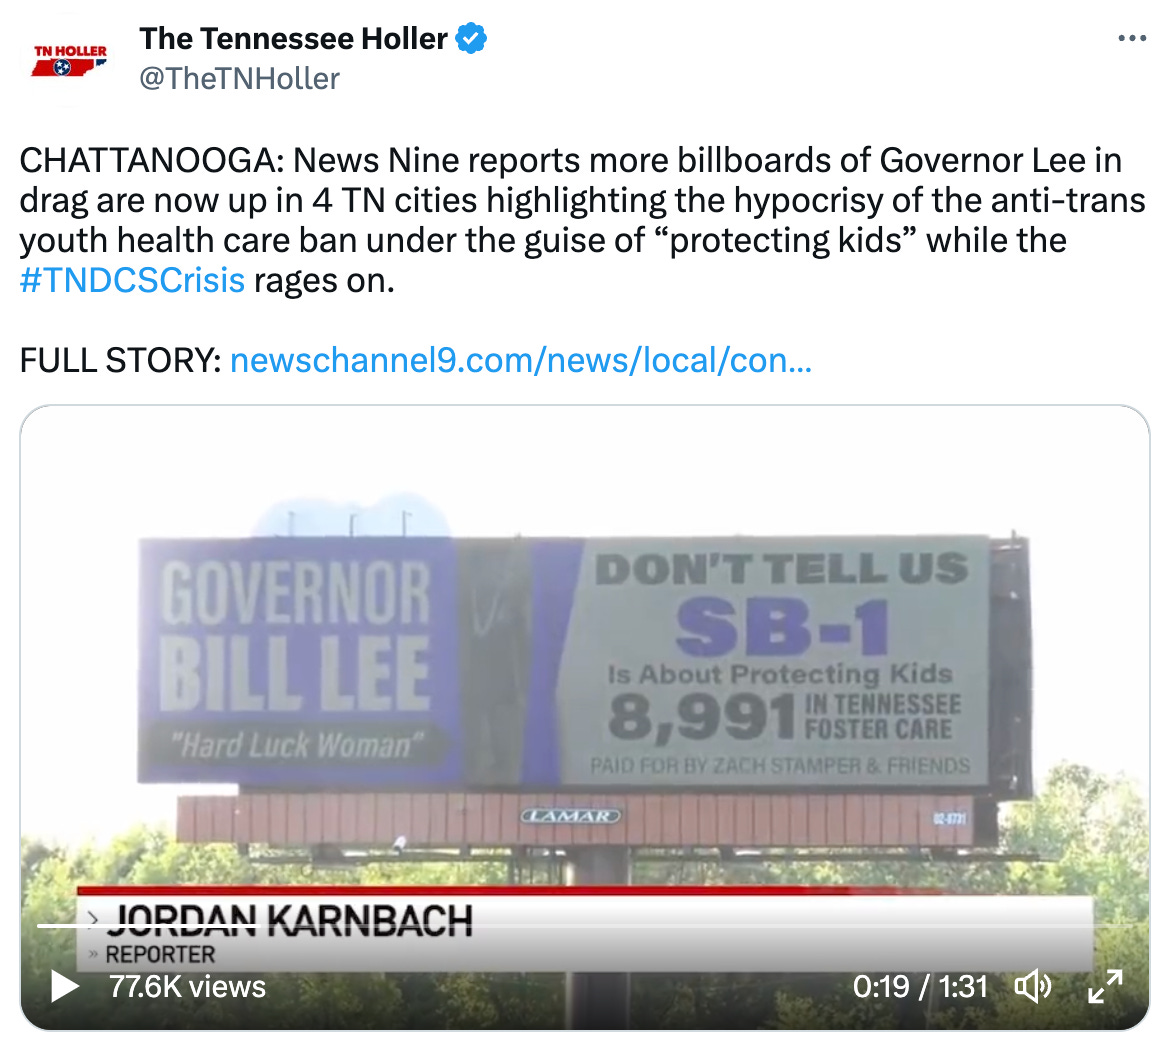 Screengrab of a billboard calling out Governor Bill Lee on his hypocrisy